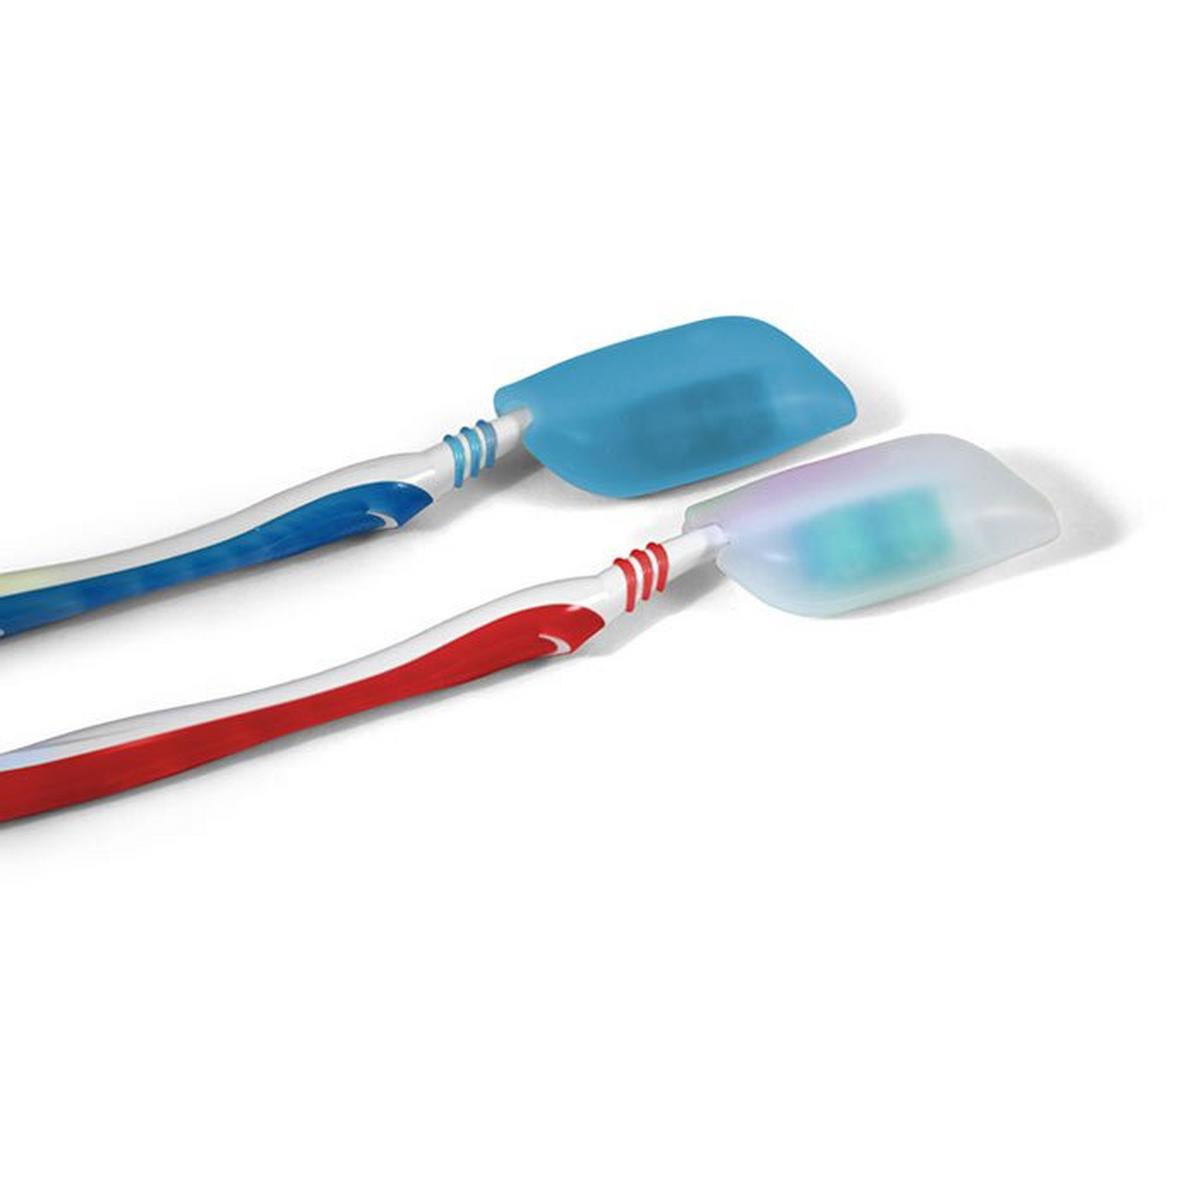 Silicone Toothbrush Cover (2 Pack)